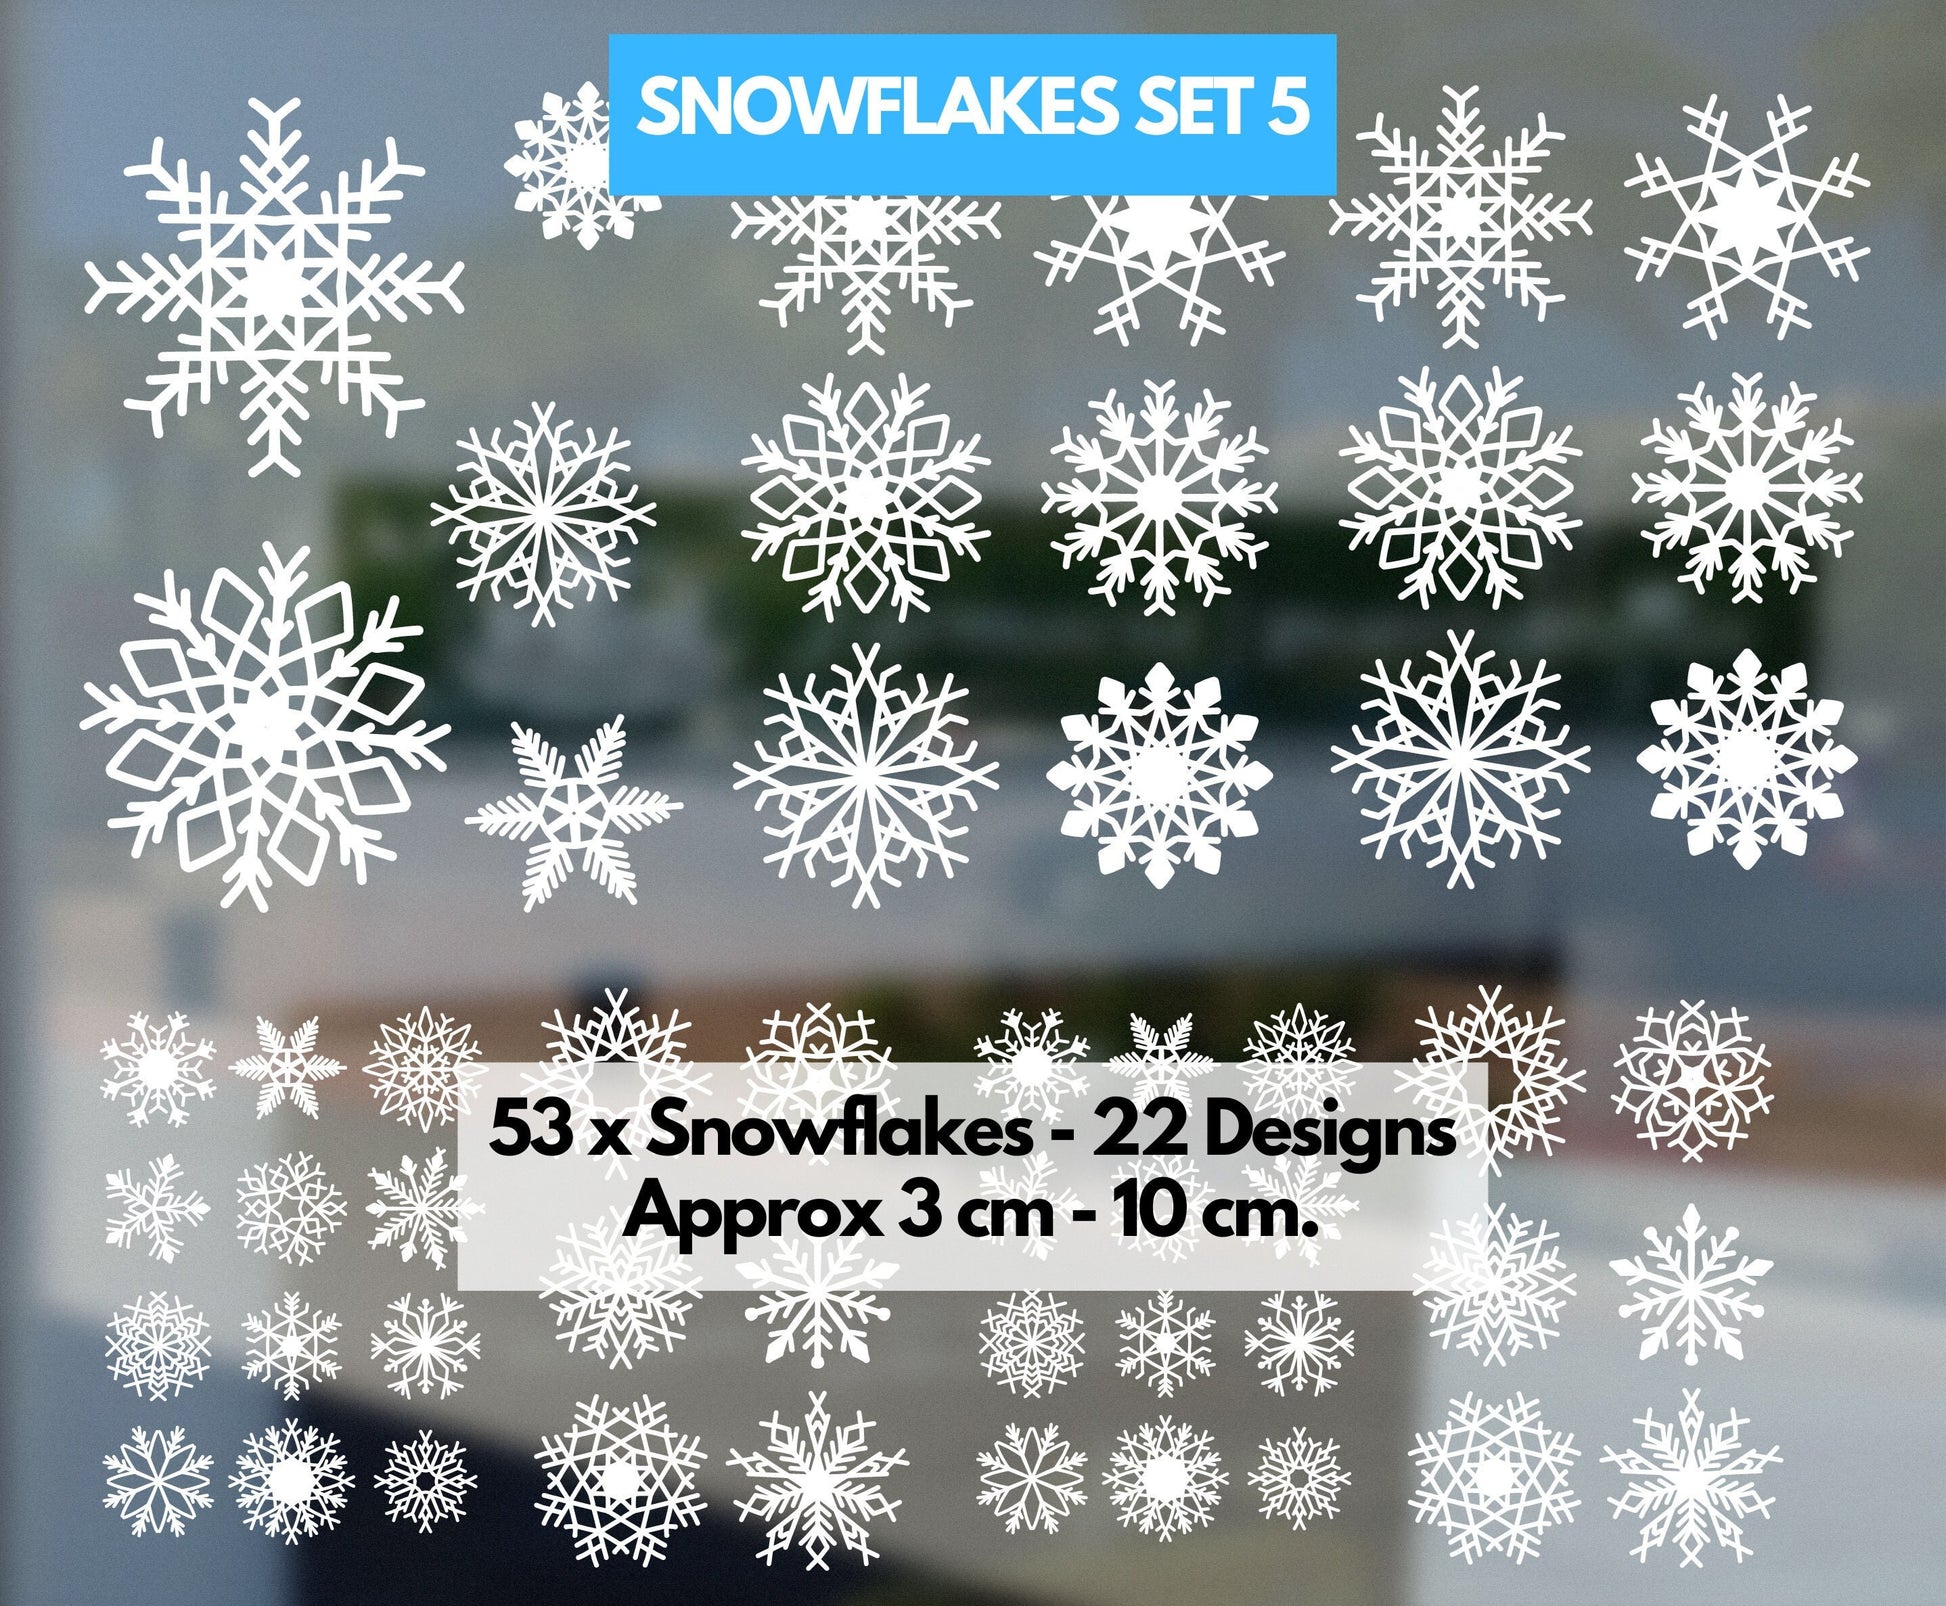 Snowflake Window Stickers | Christmas Window Stickers For Home & Shops | Snow Flake Decorations